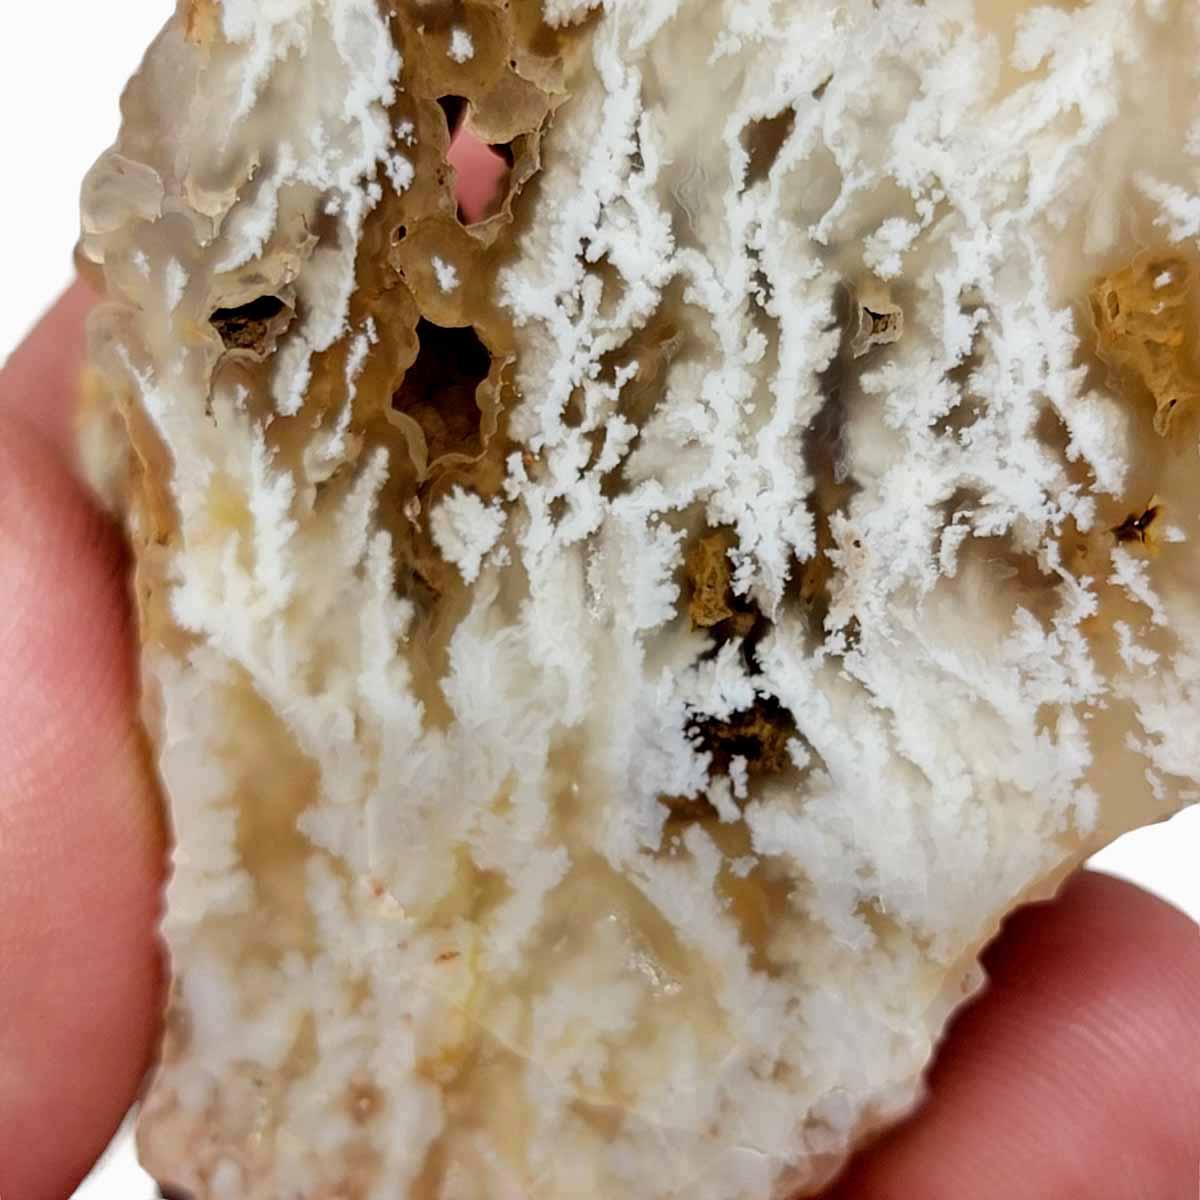 Polished Stinking Water Plume Agate Display Specimen! - LapidaryCentral